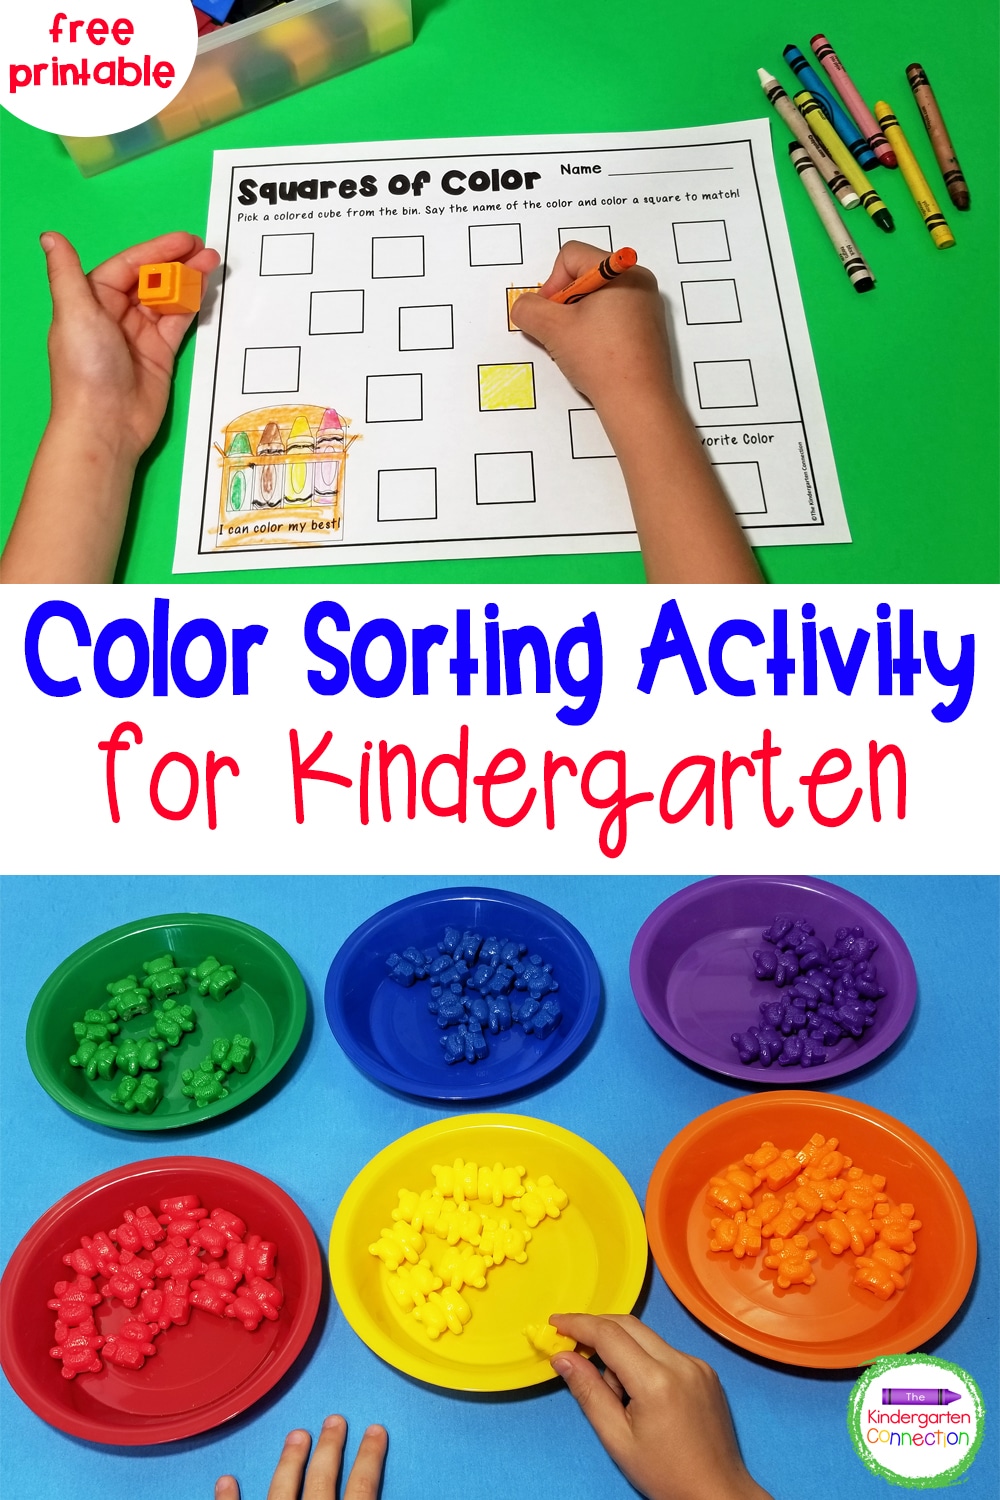 This free Color Sorting Activity is perfect for preschoolers and kindergarteners who are working on identifying colors and sorting!